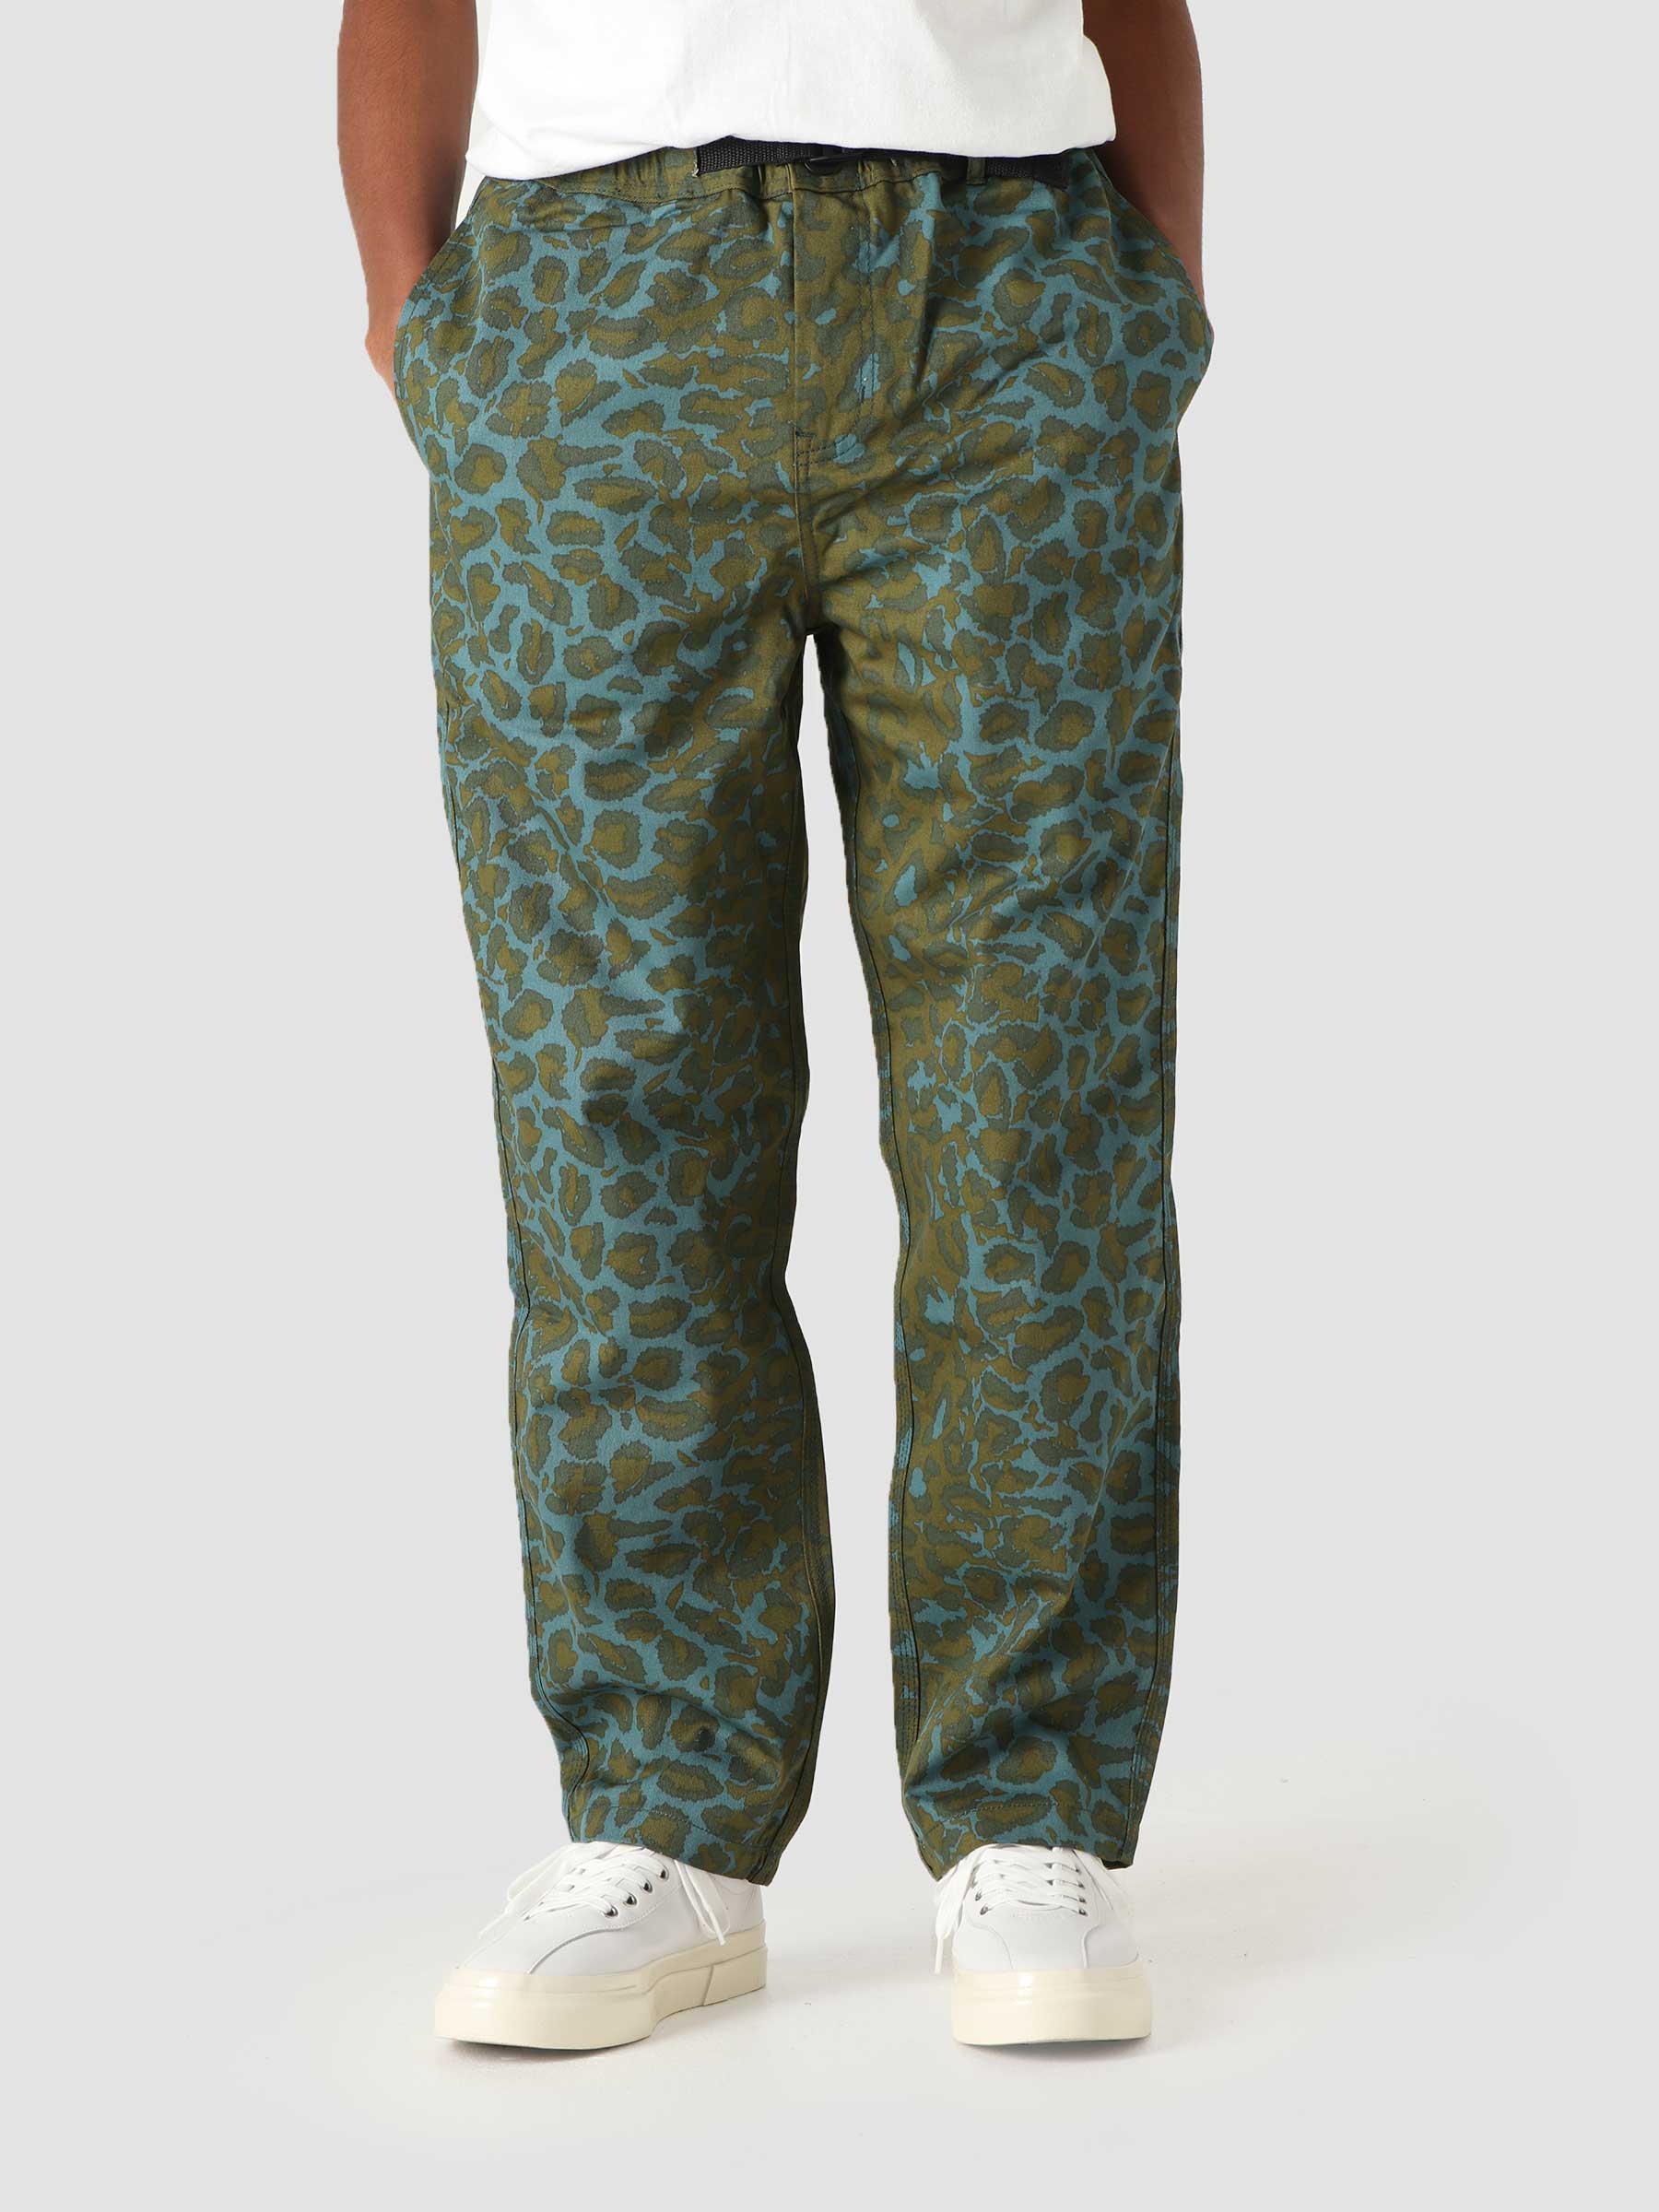 Printed Runyon Easy Pant Leopard Camo PT00186-LEPCM